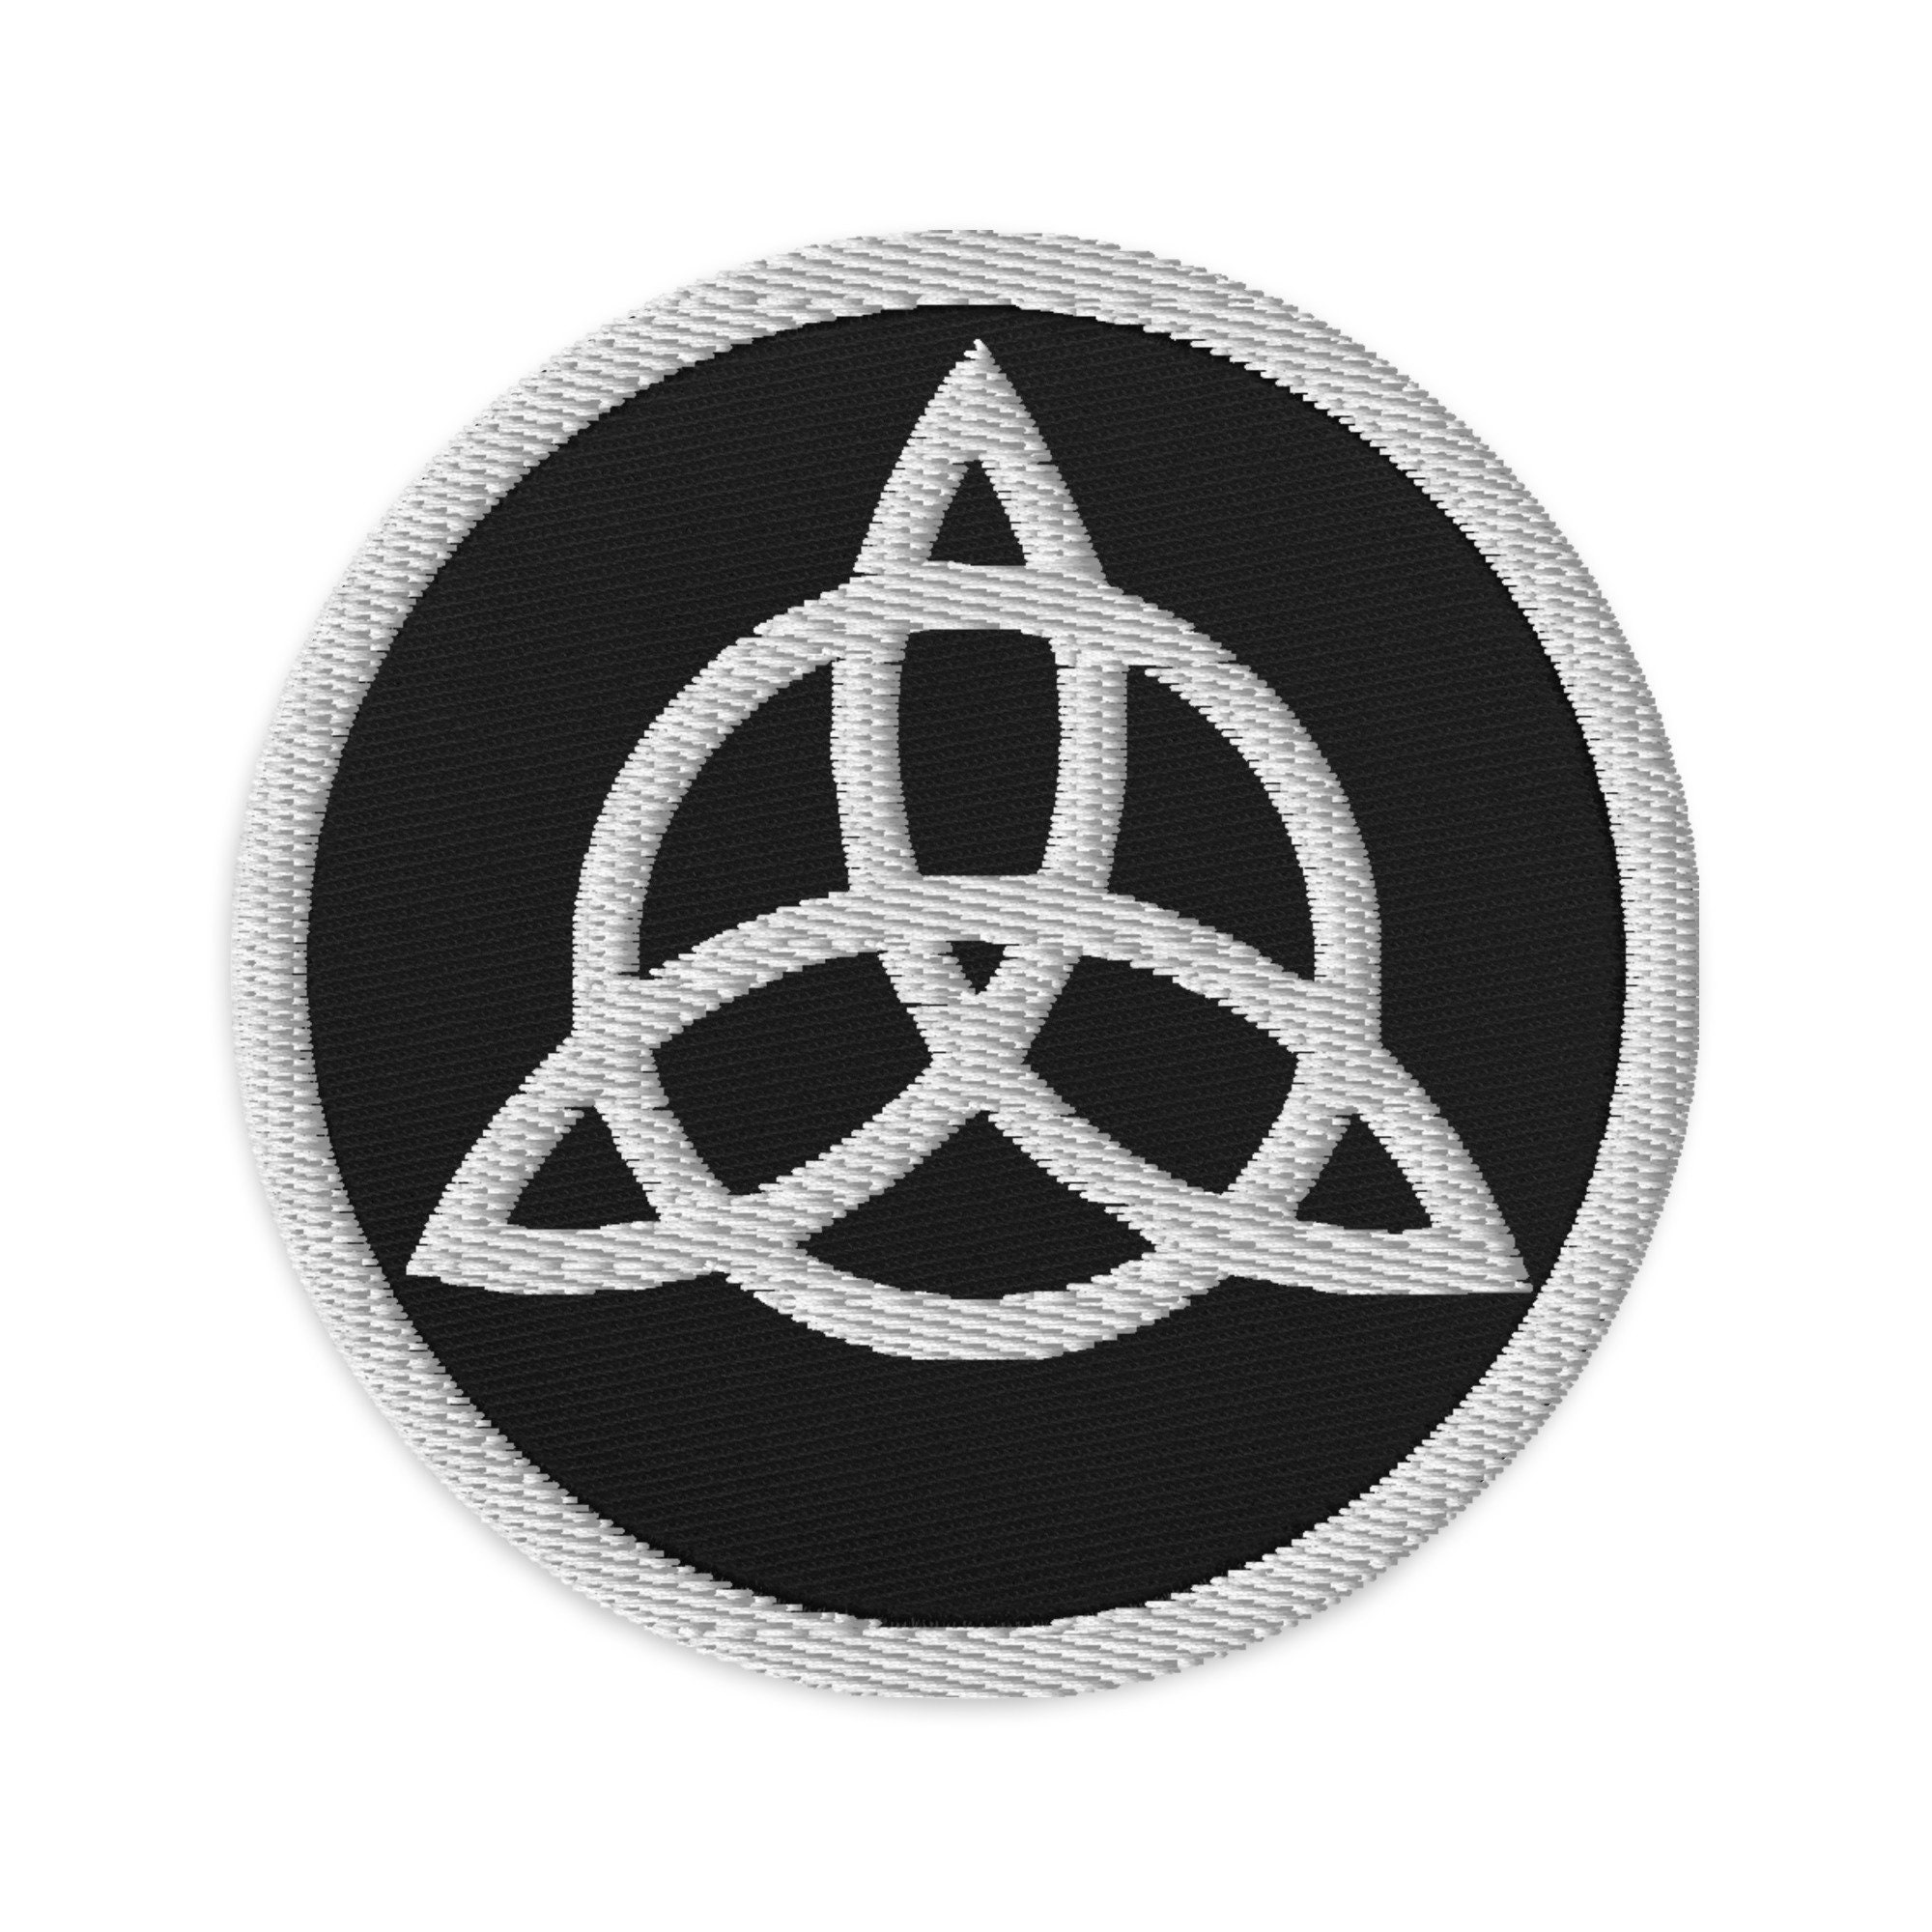 Buy Deathly Hallows Patch Embroidered Patches For Clothing Punk